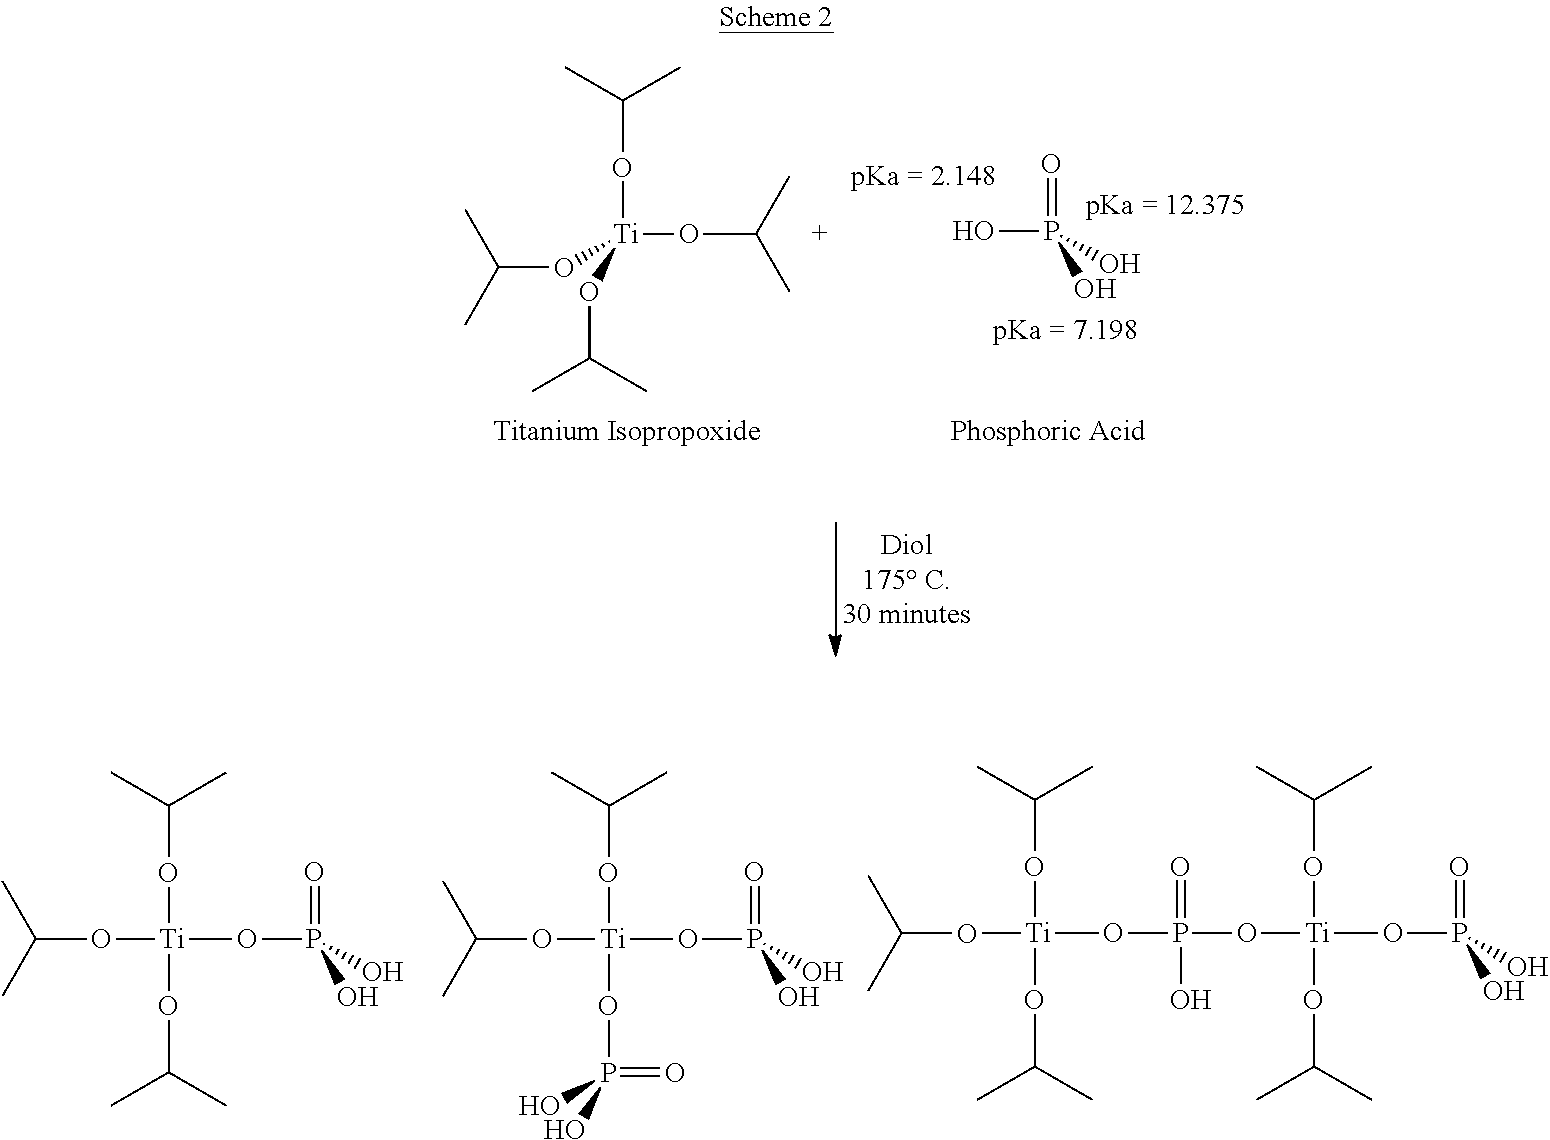 Process for the Preparation of Modified Poly(Alkylene Terephthalate) Employing an In-Situ Titanium-Containing Catalyst